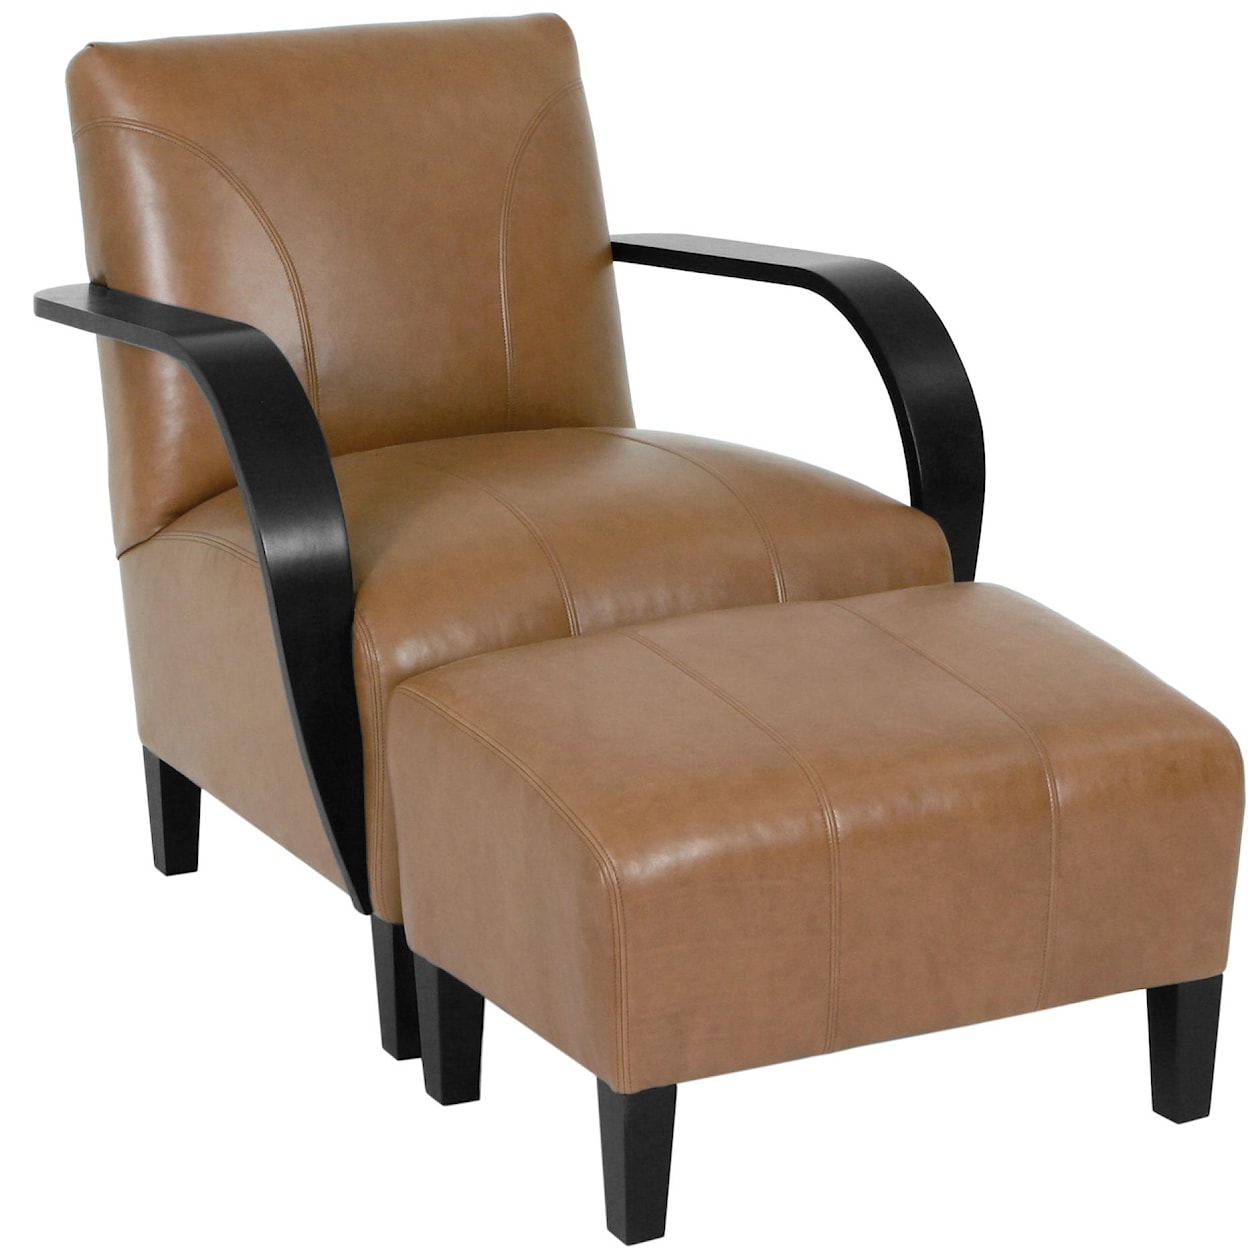 Norwalk Basie Contemporary Chair and Ottoman